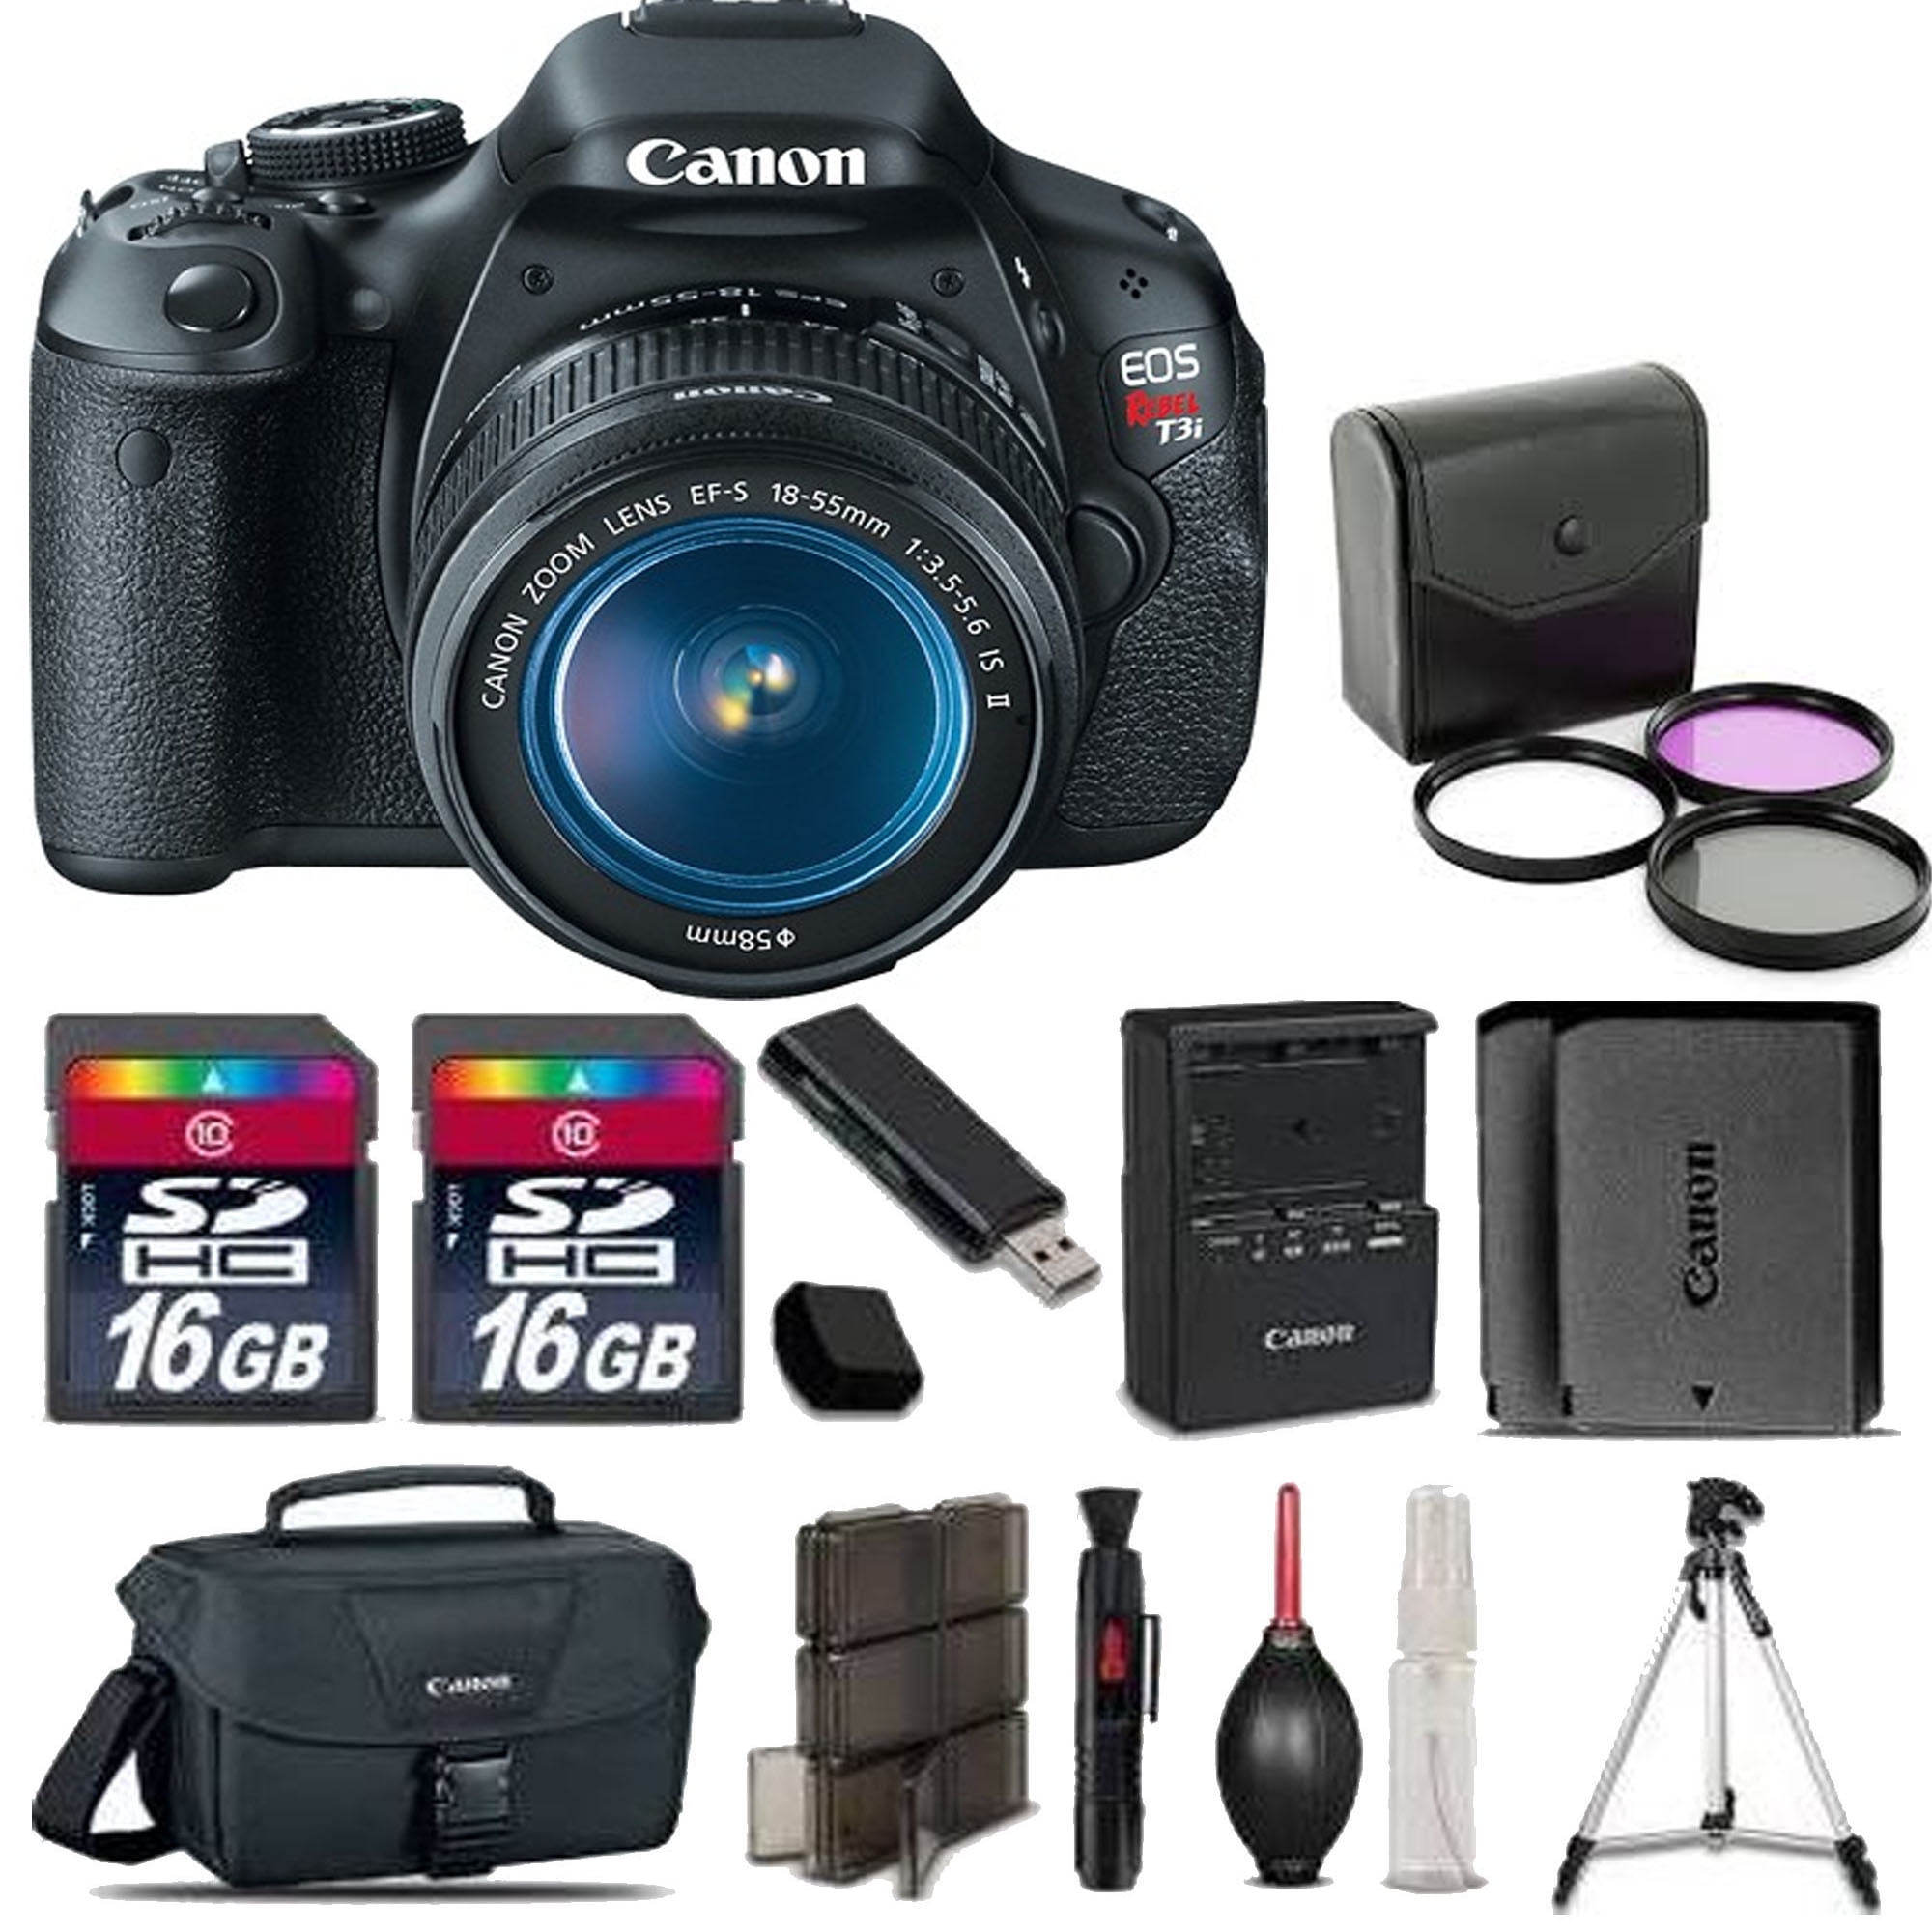 Canon Eos Rebel T3i Dslr Camera With Ef S 18 55mm Is Ii Lens Essential